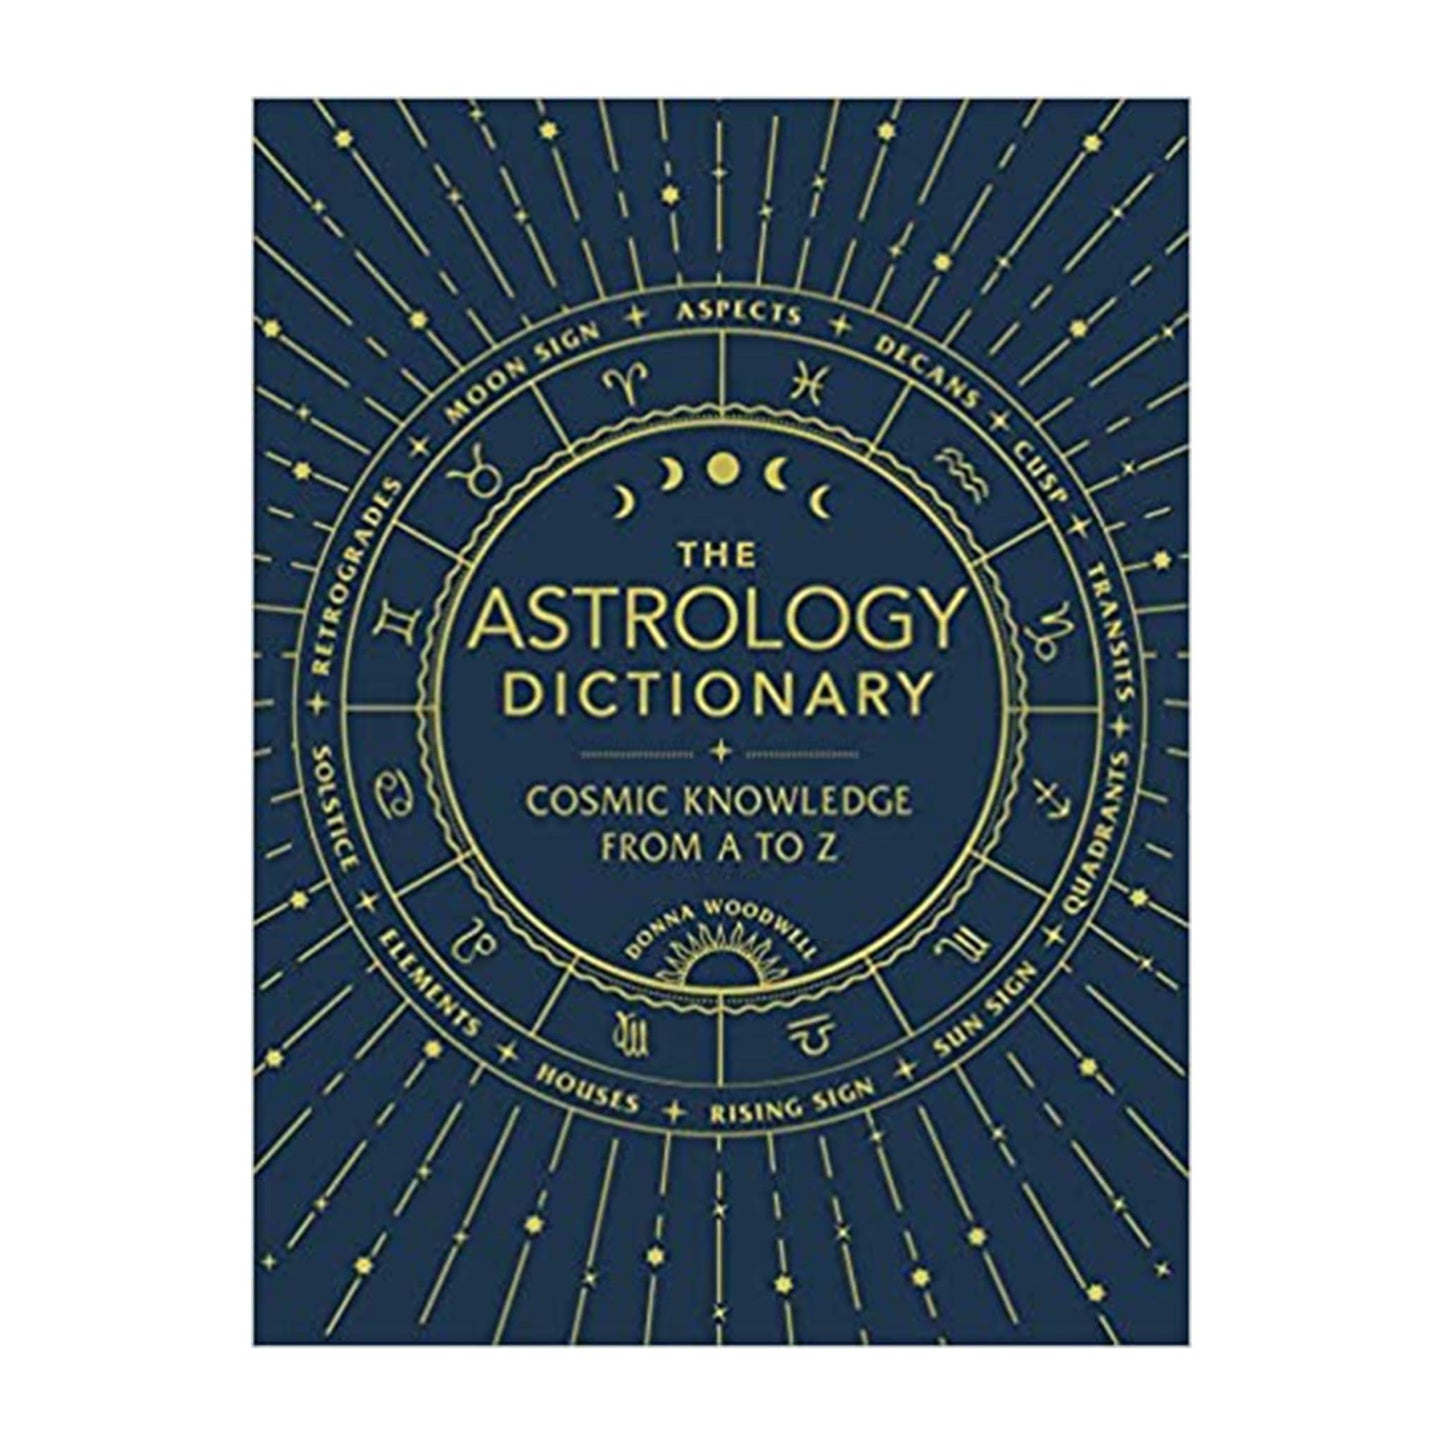 The Astrology Dictionary: Cosmic Knowledge from A to Z - Muse + Moonstone